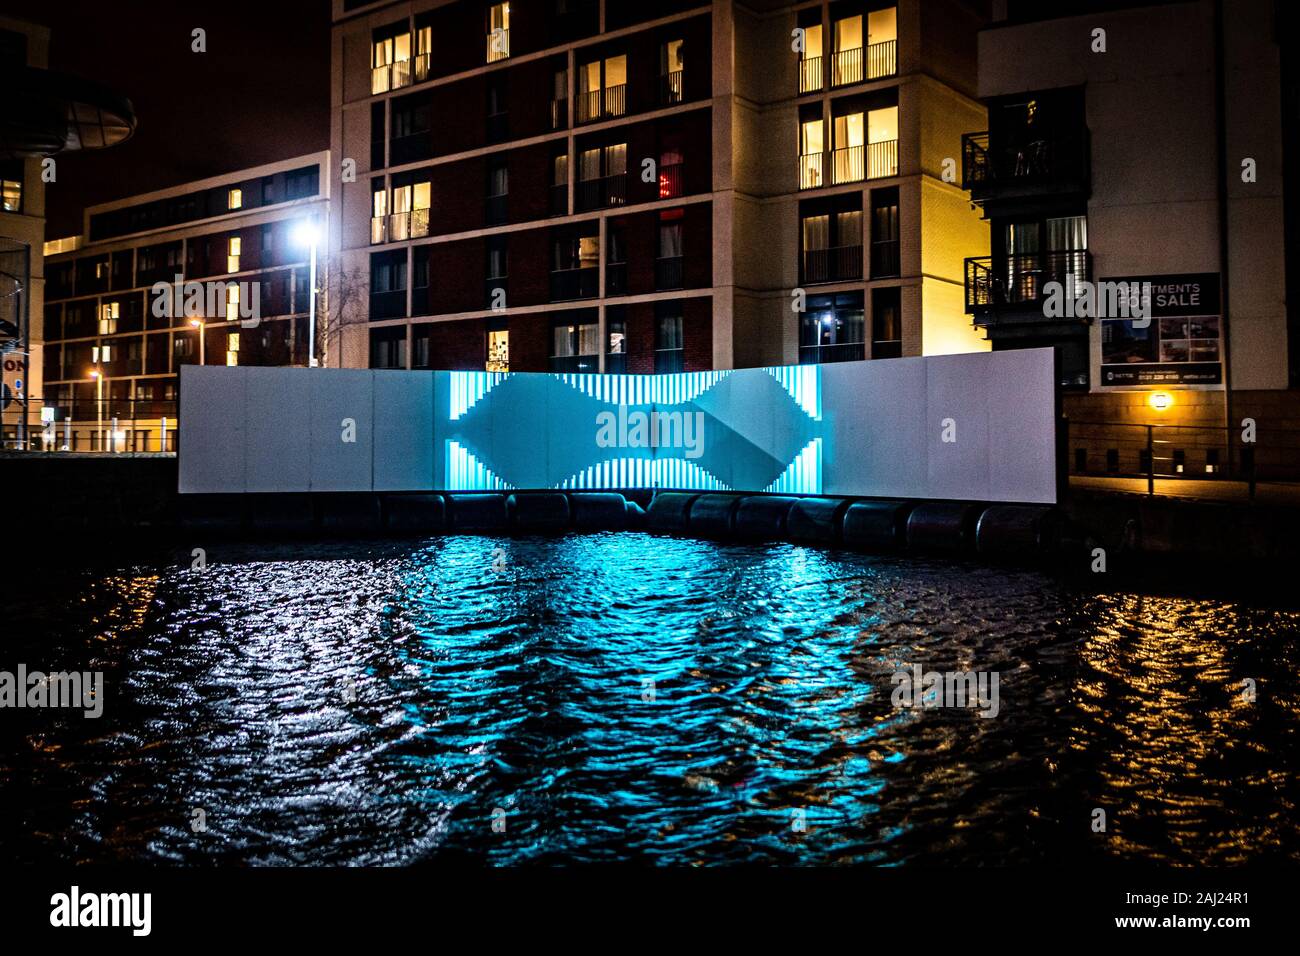 Edinburgh, UK. Wed 1st January 2020. The opening night of “Message from the Skies: Shorelines”, a collection of letters to Scotland reflecting on our relationship with our seas, waters and coasts and our maritime heritage. This projection is “Seascape with WEC” which takes place by the Union Canal in Fountainbridge and features writer Kathleen Jamie, designer Thomas Moulson and projection by Bright Side Studios. Kathleen Jamie’s poem “Seascape with WEC” captures her curiosity with new wave energy converters she witnessed being tested on the Orkney Islands. Stock Photo